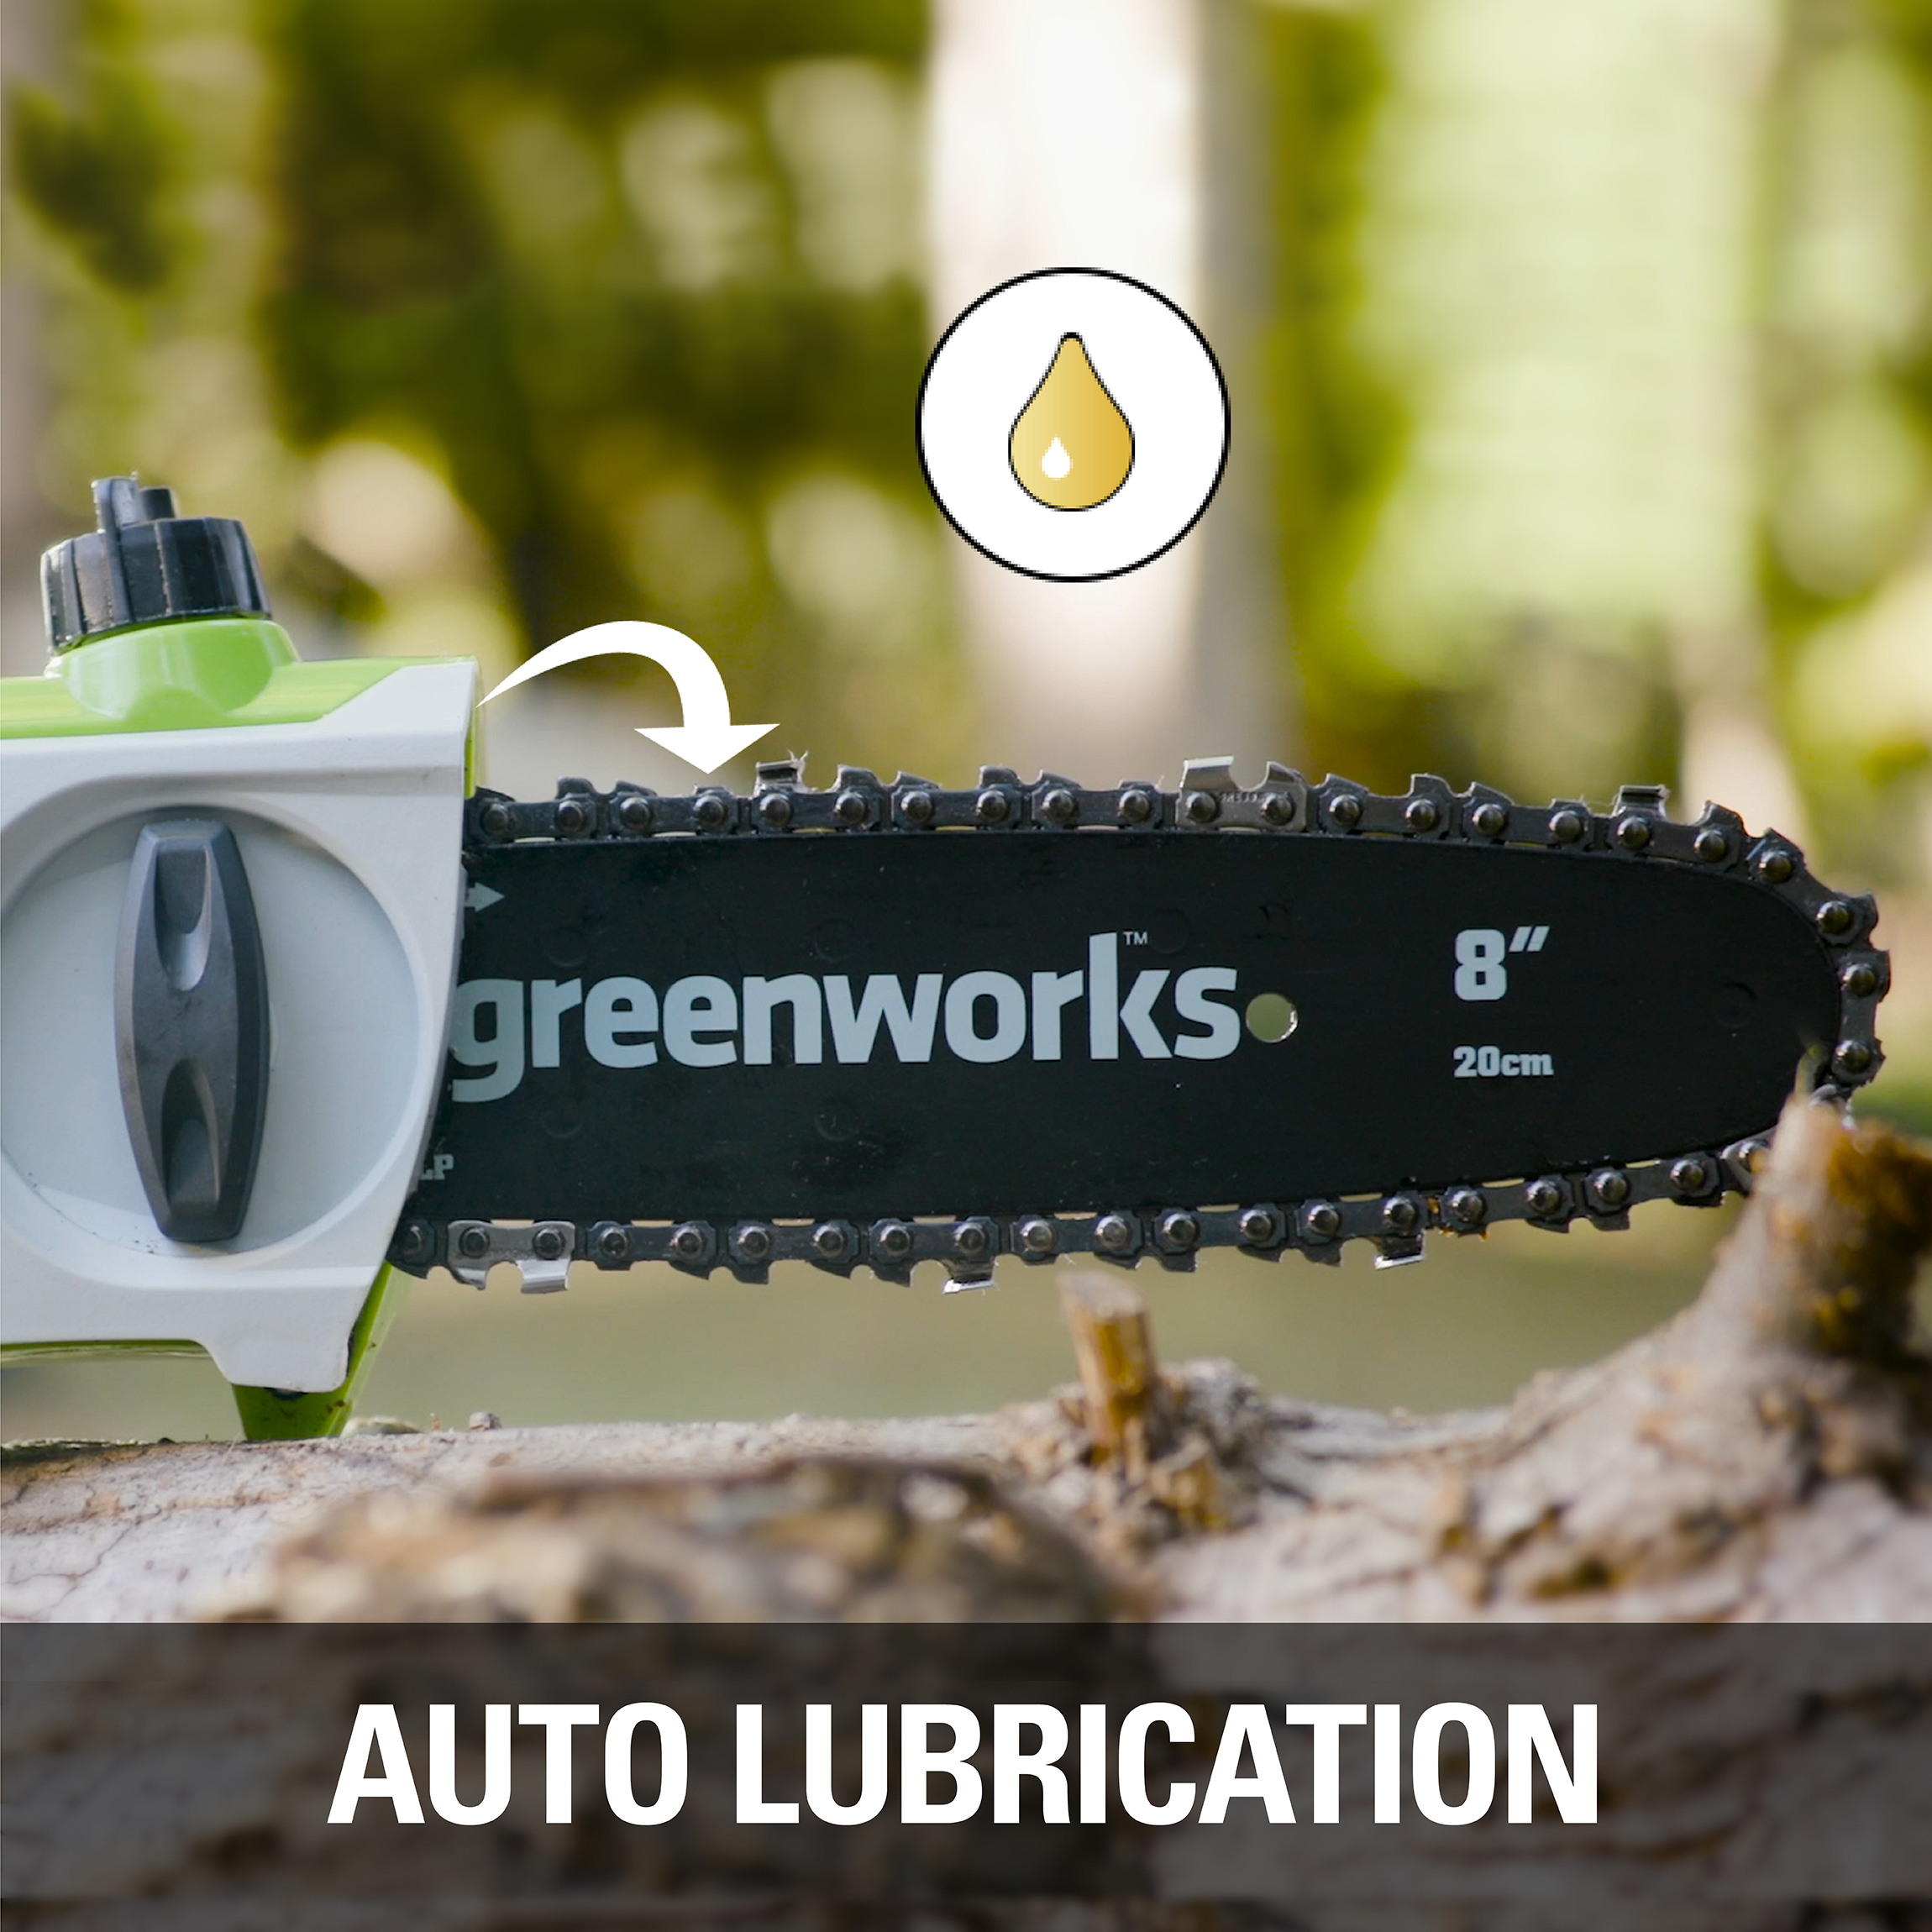 Greenworks 65 Amp 8-Inch Corded Electric Pole Saw, 20192 - image 5 of 10